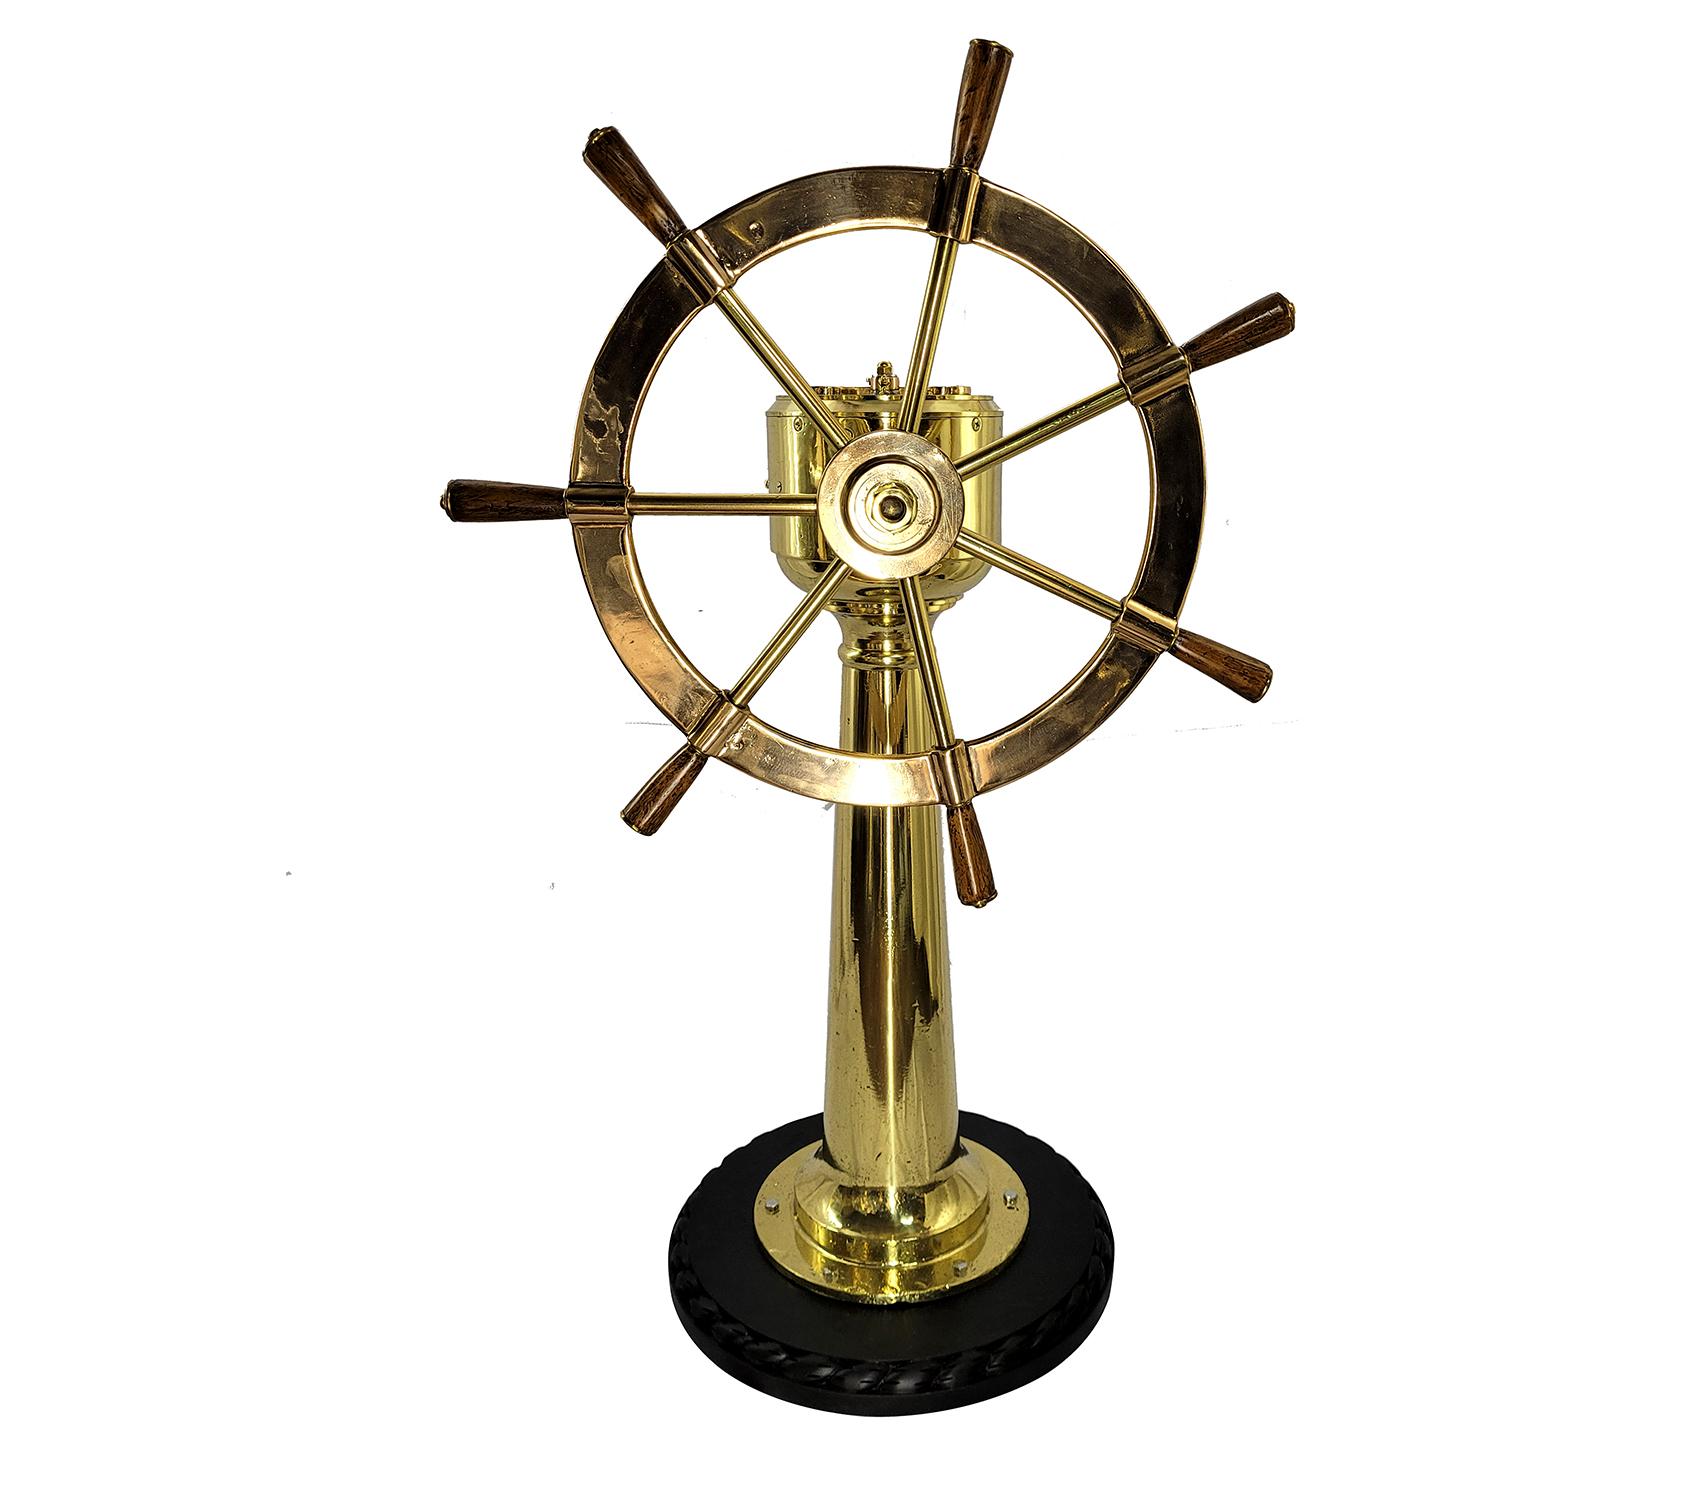 Meticulously polished and lacquered maritime relic. The very sturdy six spoke wheel has varnished wood handles, and is mounted to the geared column. The pedestal is mounted to a wood base with rope style carving. The head of the pedestal has a